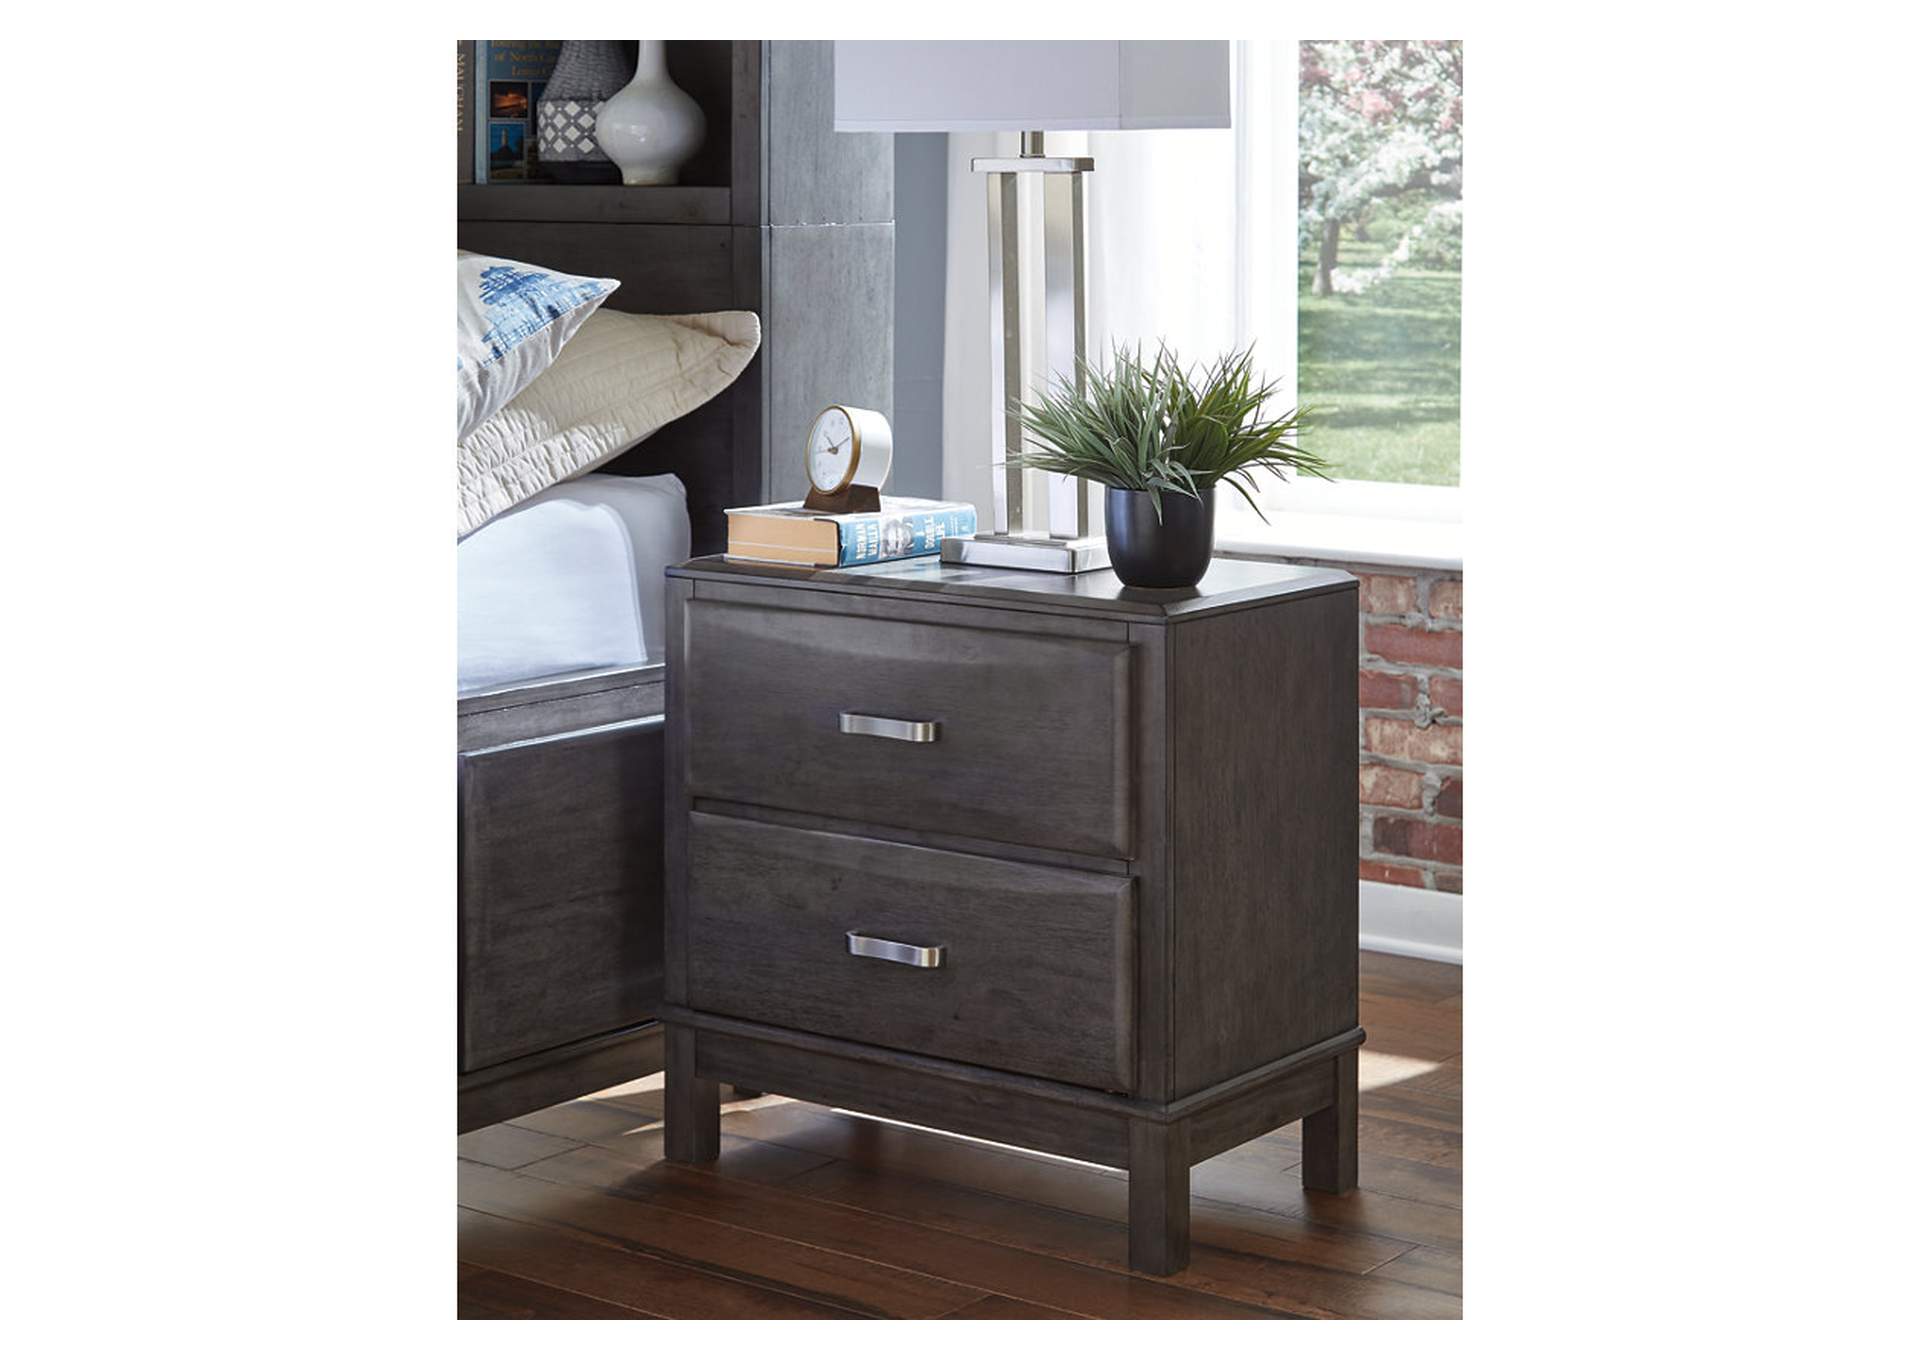 Caitbrook King Storage Bed, Dresser, Mirror and Nightstand,Signature Design By Ashley